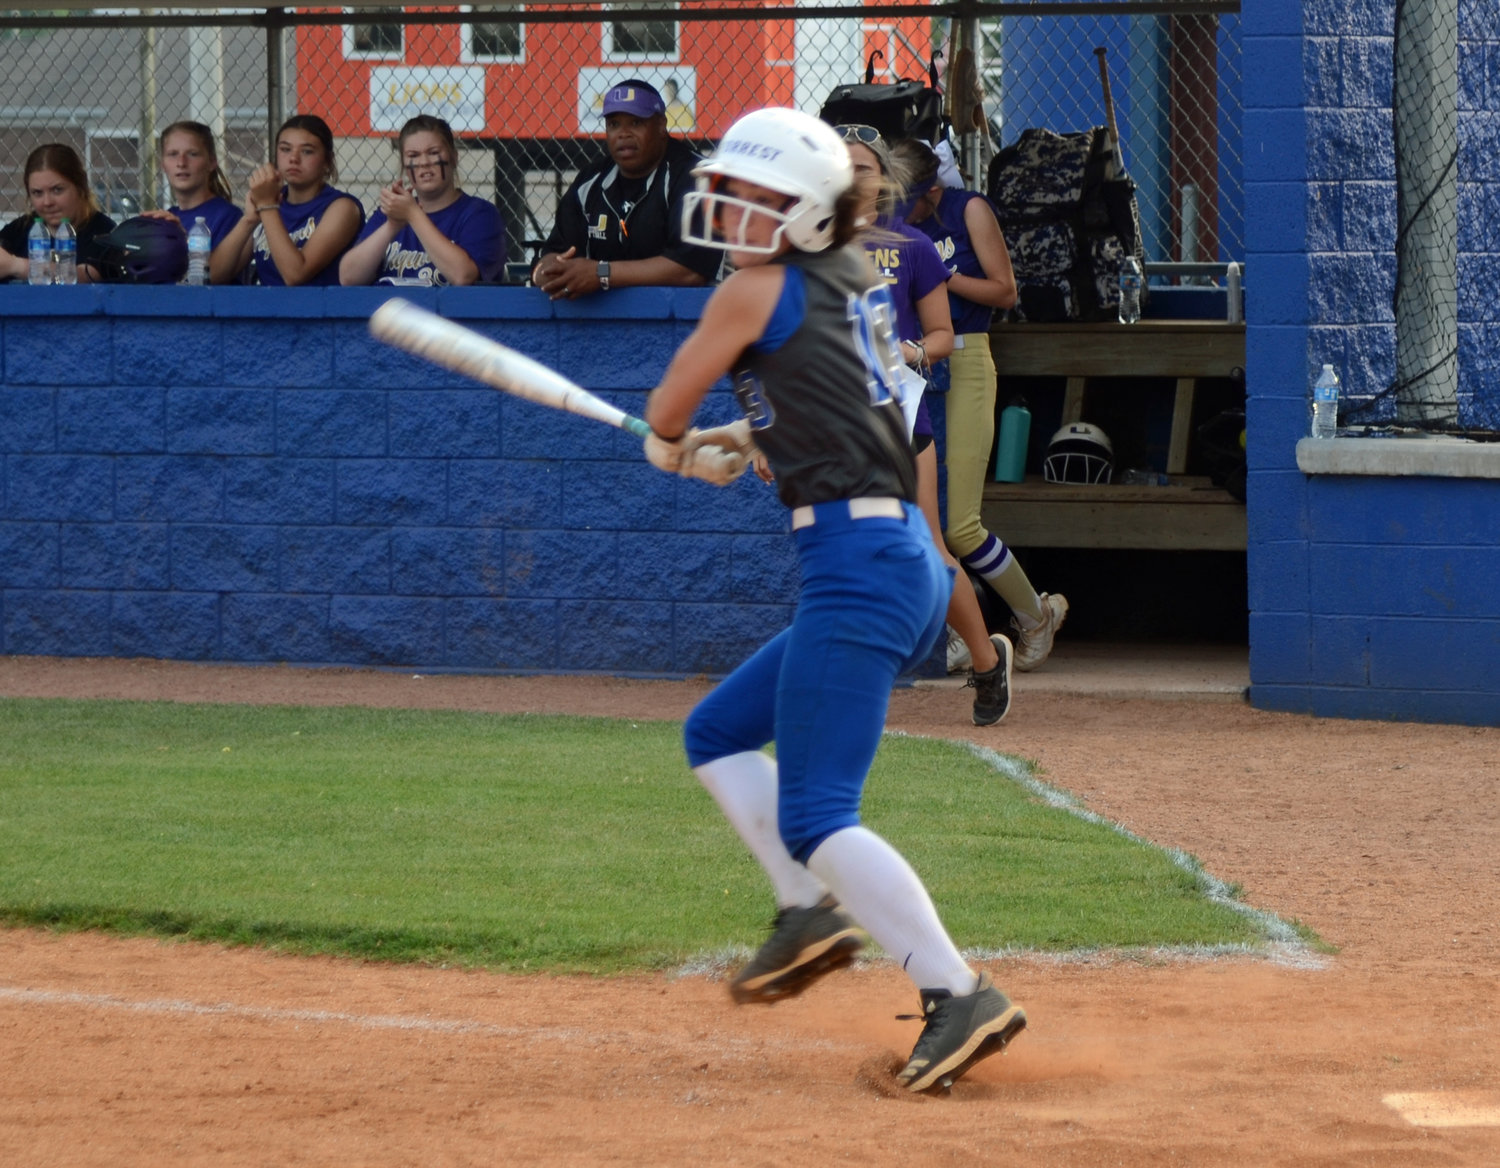 Forrest’s Addison Bunty is the lone senior on the squad and Friday night also marks graduation day for the Lady Rockets’ left fielder.